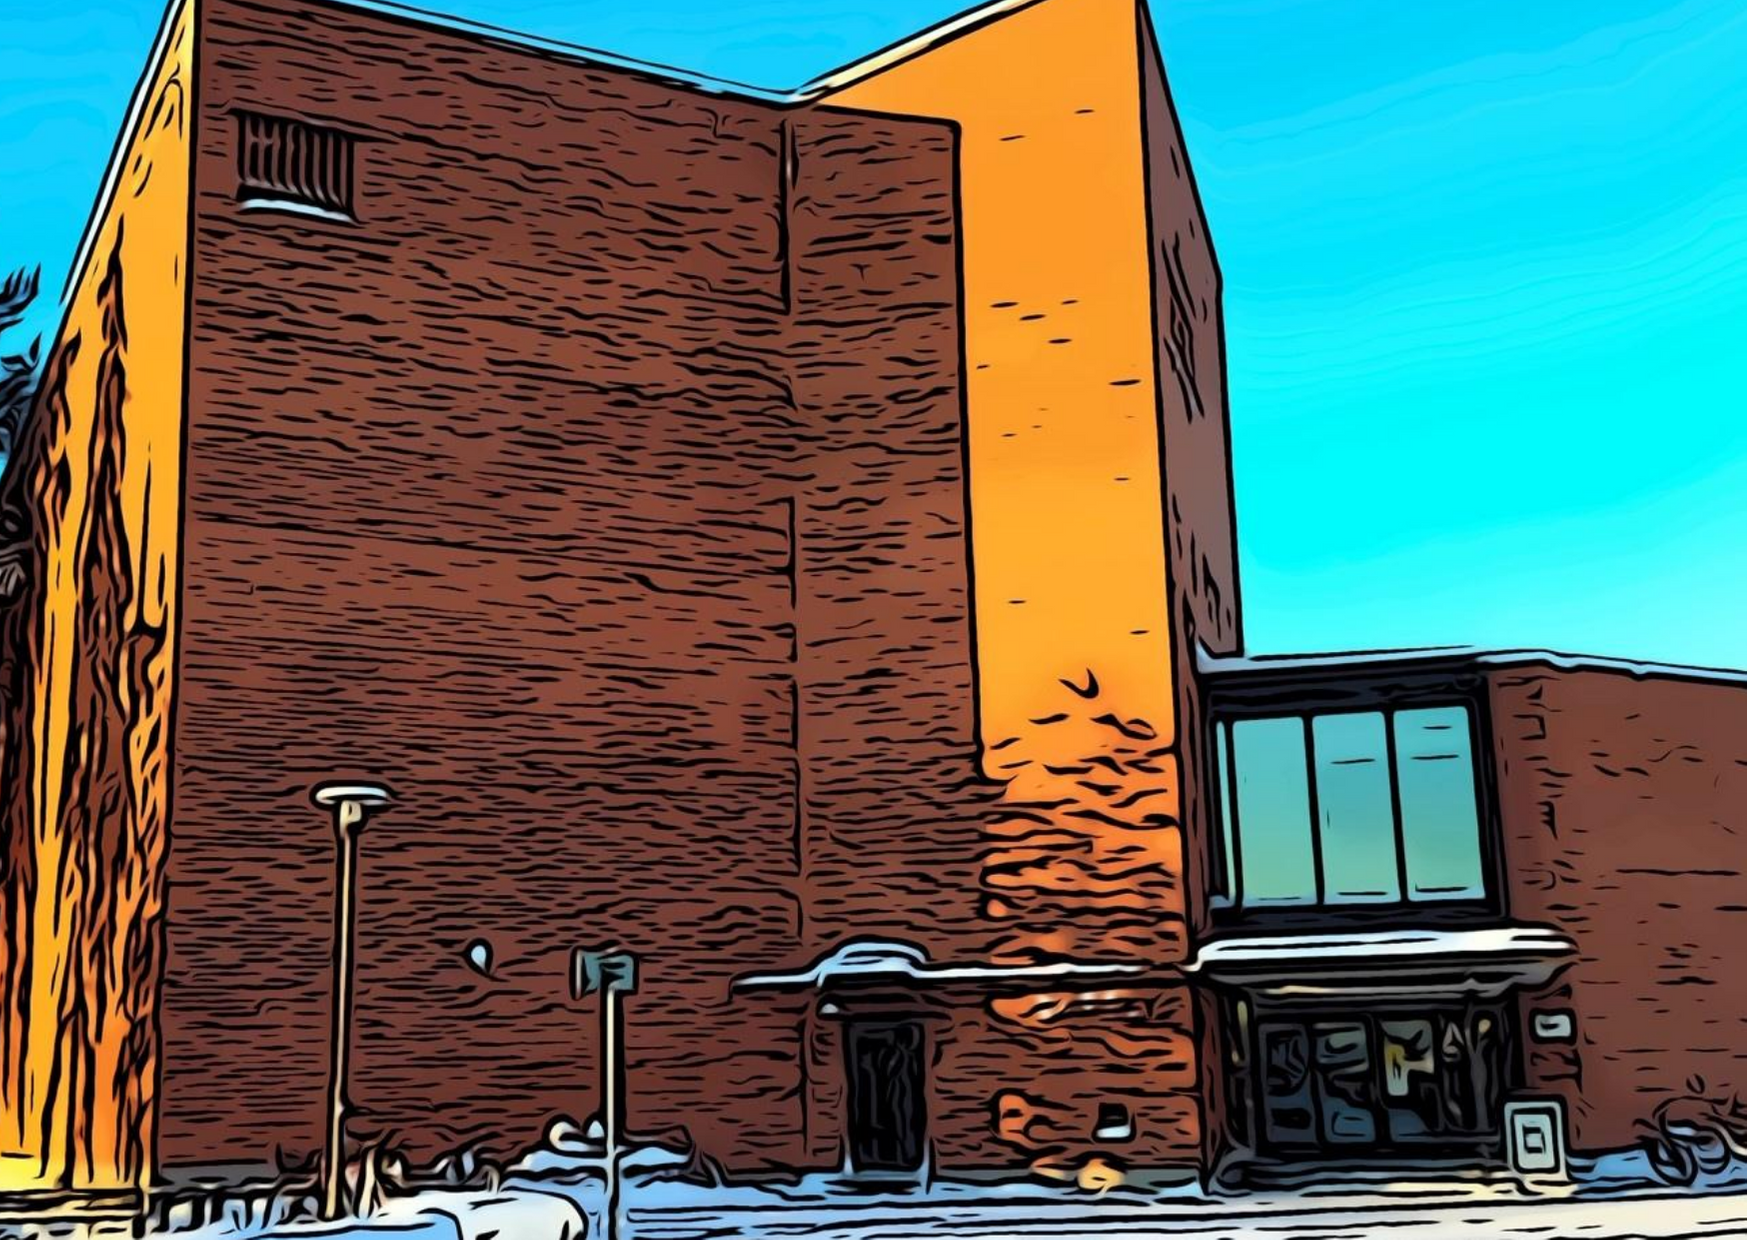 Animated view of the Carelia-building